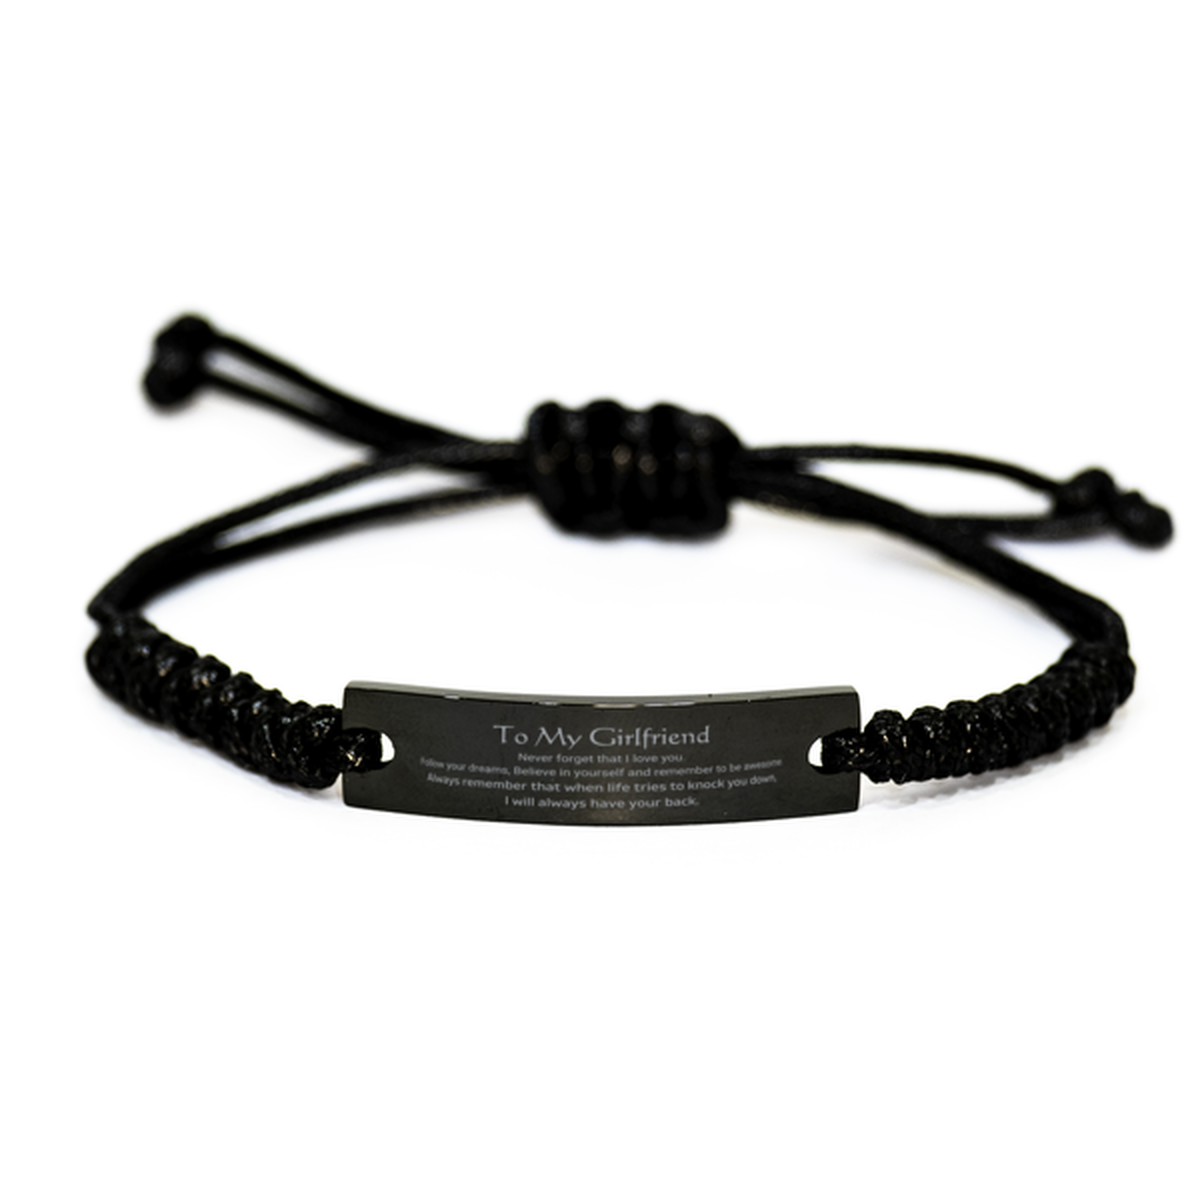 Inspirational Gifts for Girlfriend, Follow your dreams, Believe in yourself, Girlfriend Black Rope Bracelet, Birthday Christmas Unique Gifts For Girlfriend